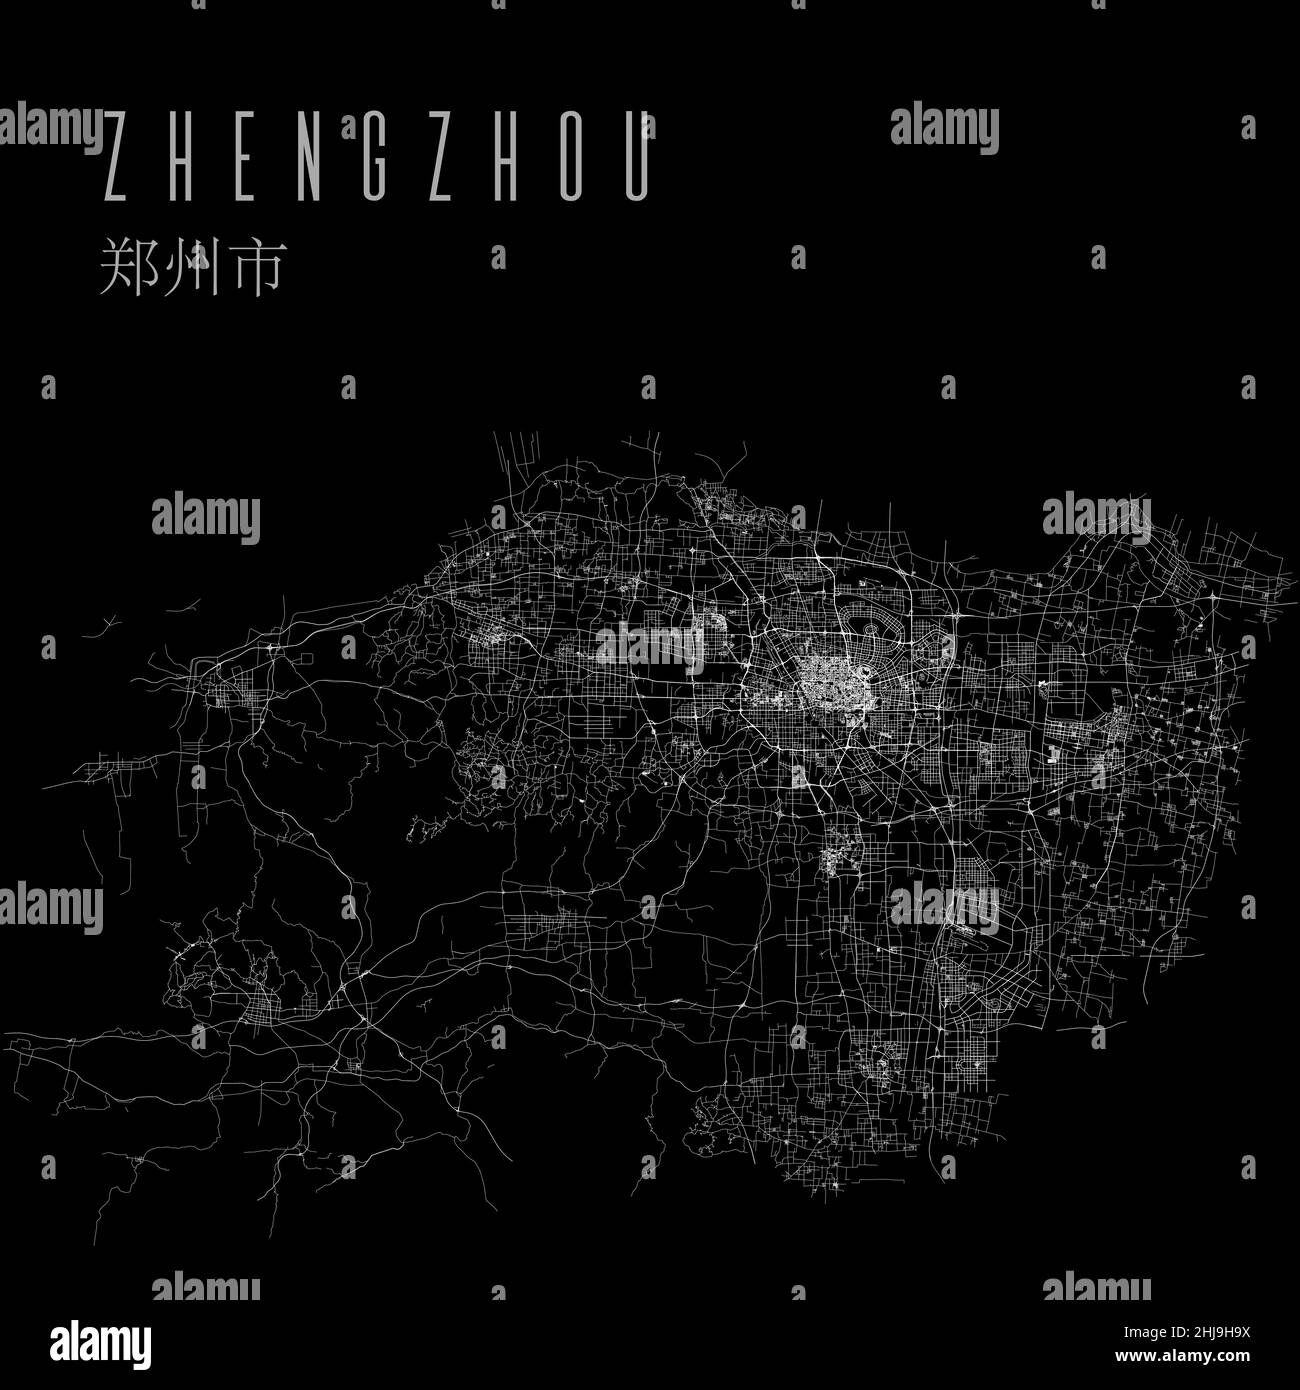 Zhengzhou city province vector map poster. China municipality square linear road map, administrative municipal area, white lines on black background, Stock Vector